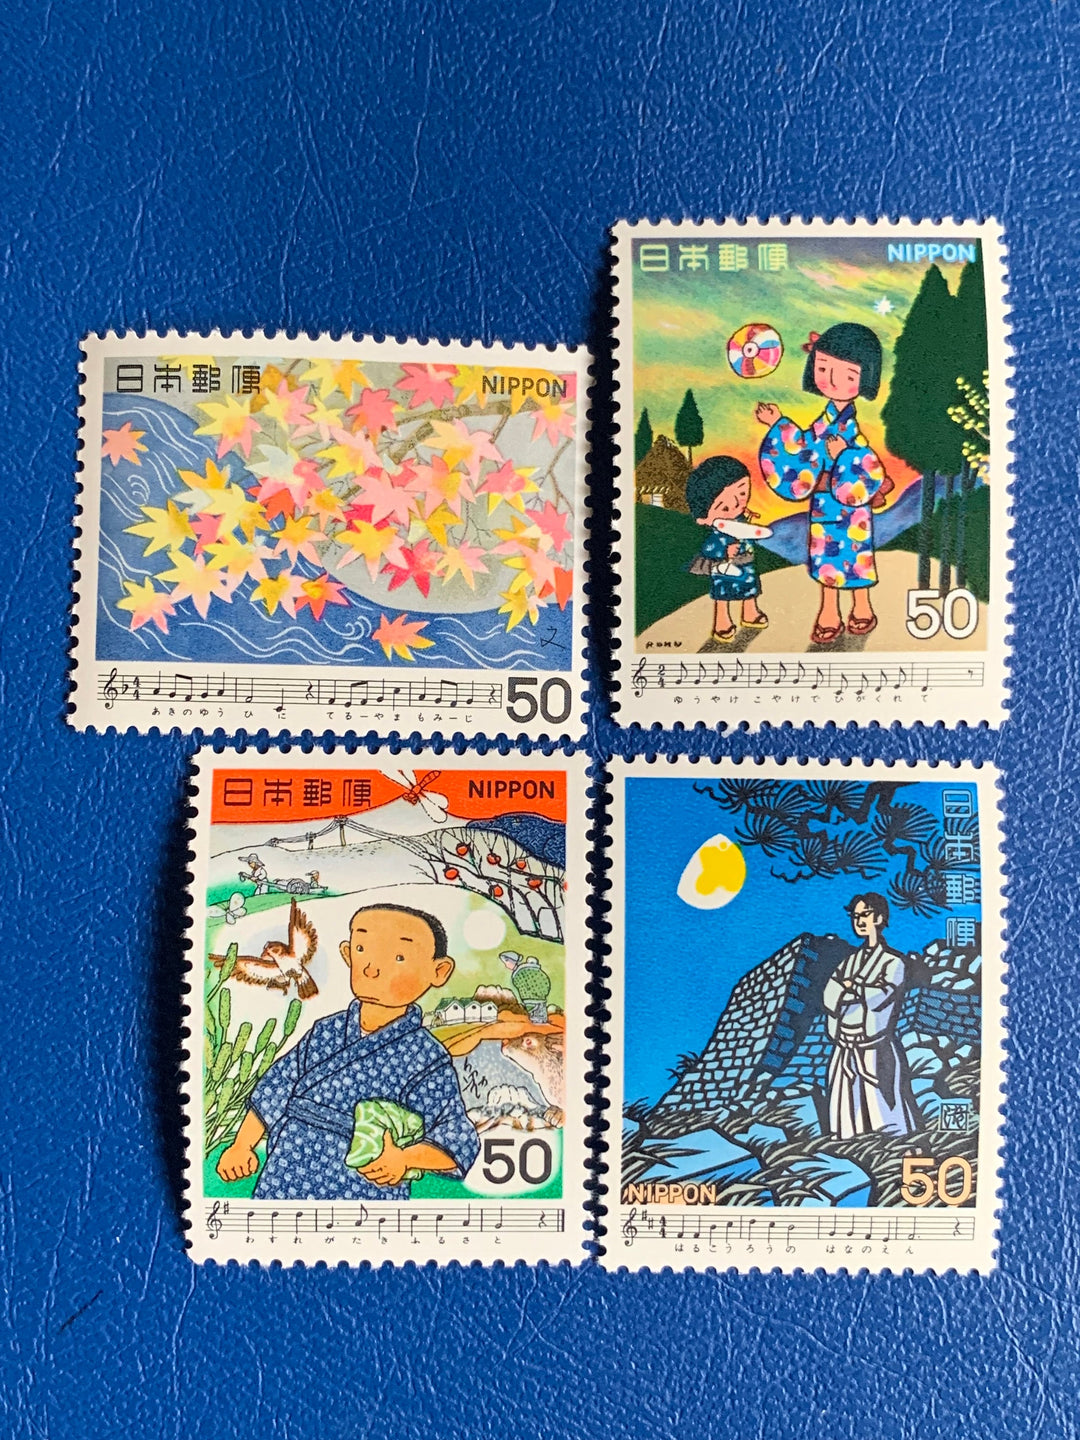 Japan- Original Vintage Postage Stamps- 1979 - Japanese Songs - for the collector, artist or crafter - scrapbooks, paper crafts, decoupage